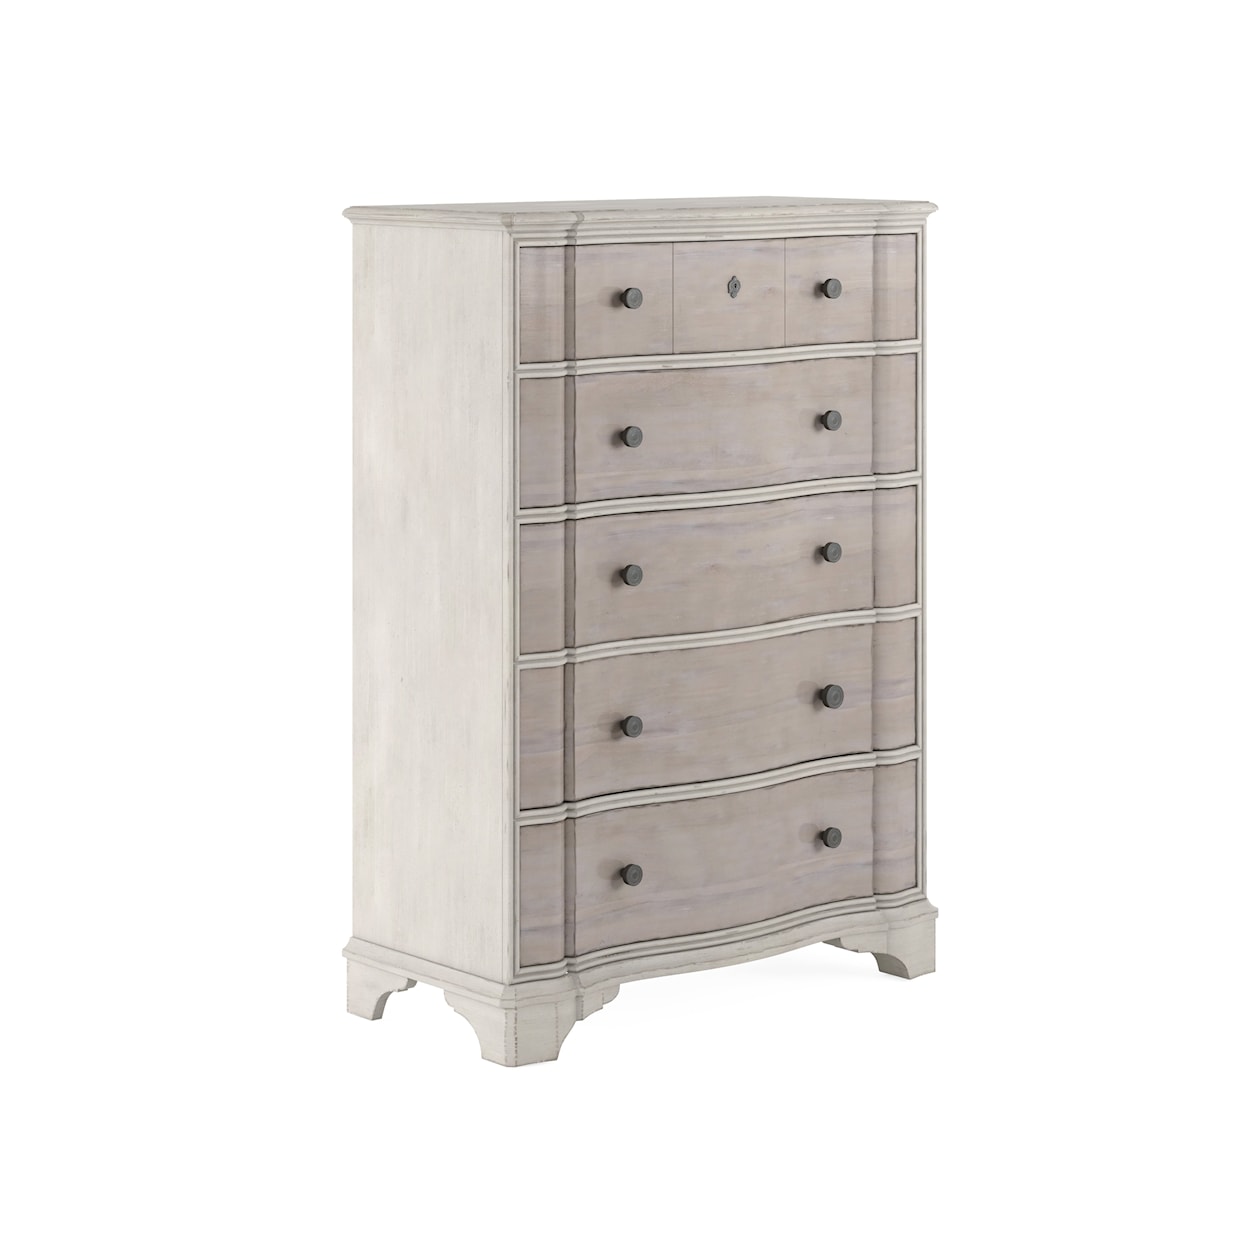 A.R.T. Furniture Inc Alcove Bedroom Chest